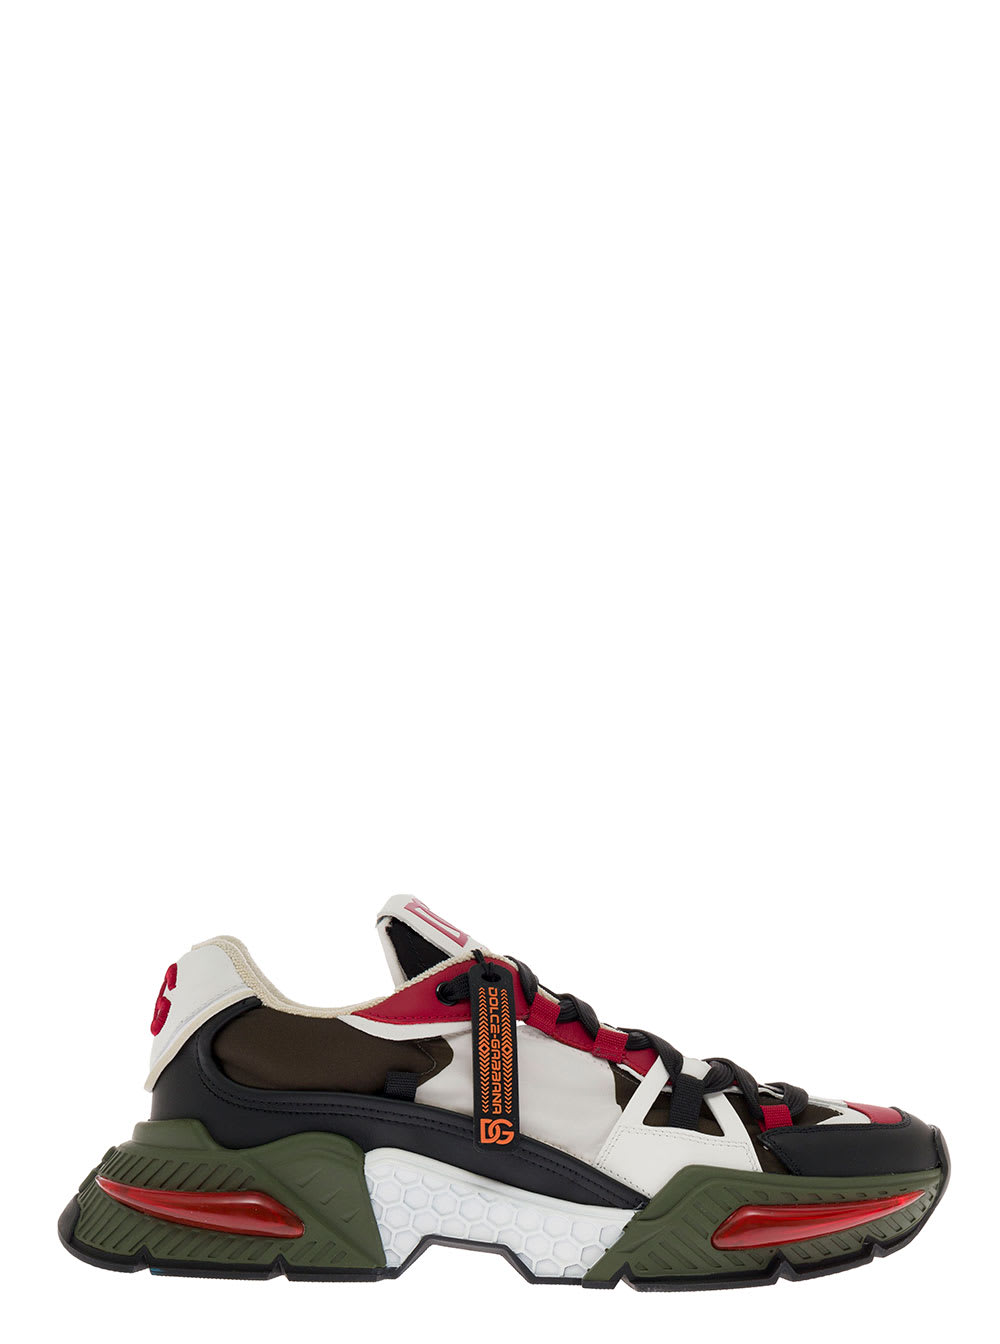 Dolce & Gabbana Dolce & Gaacbbana Mans Airmaster Multicolor Mix Of Materials Sneakers